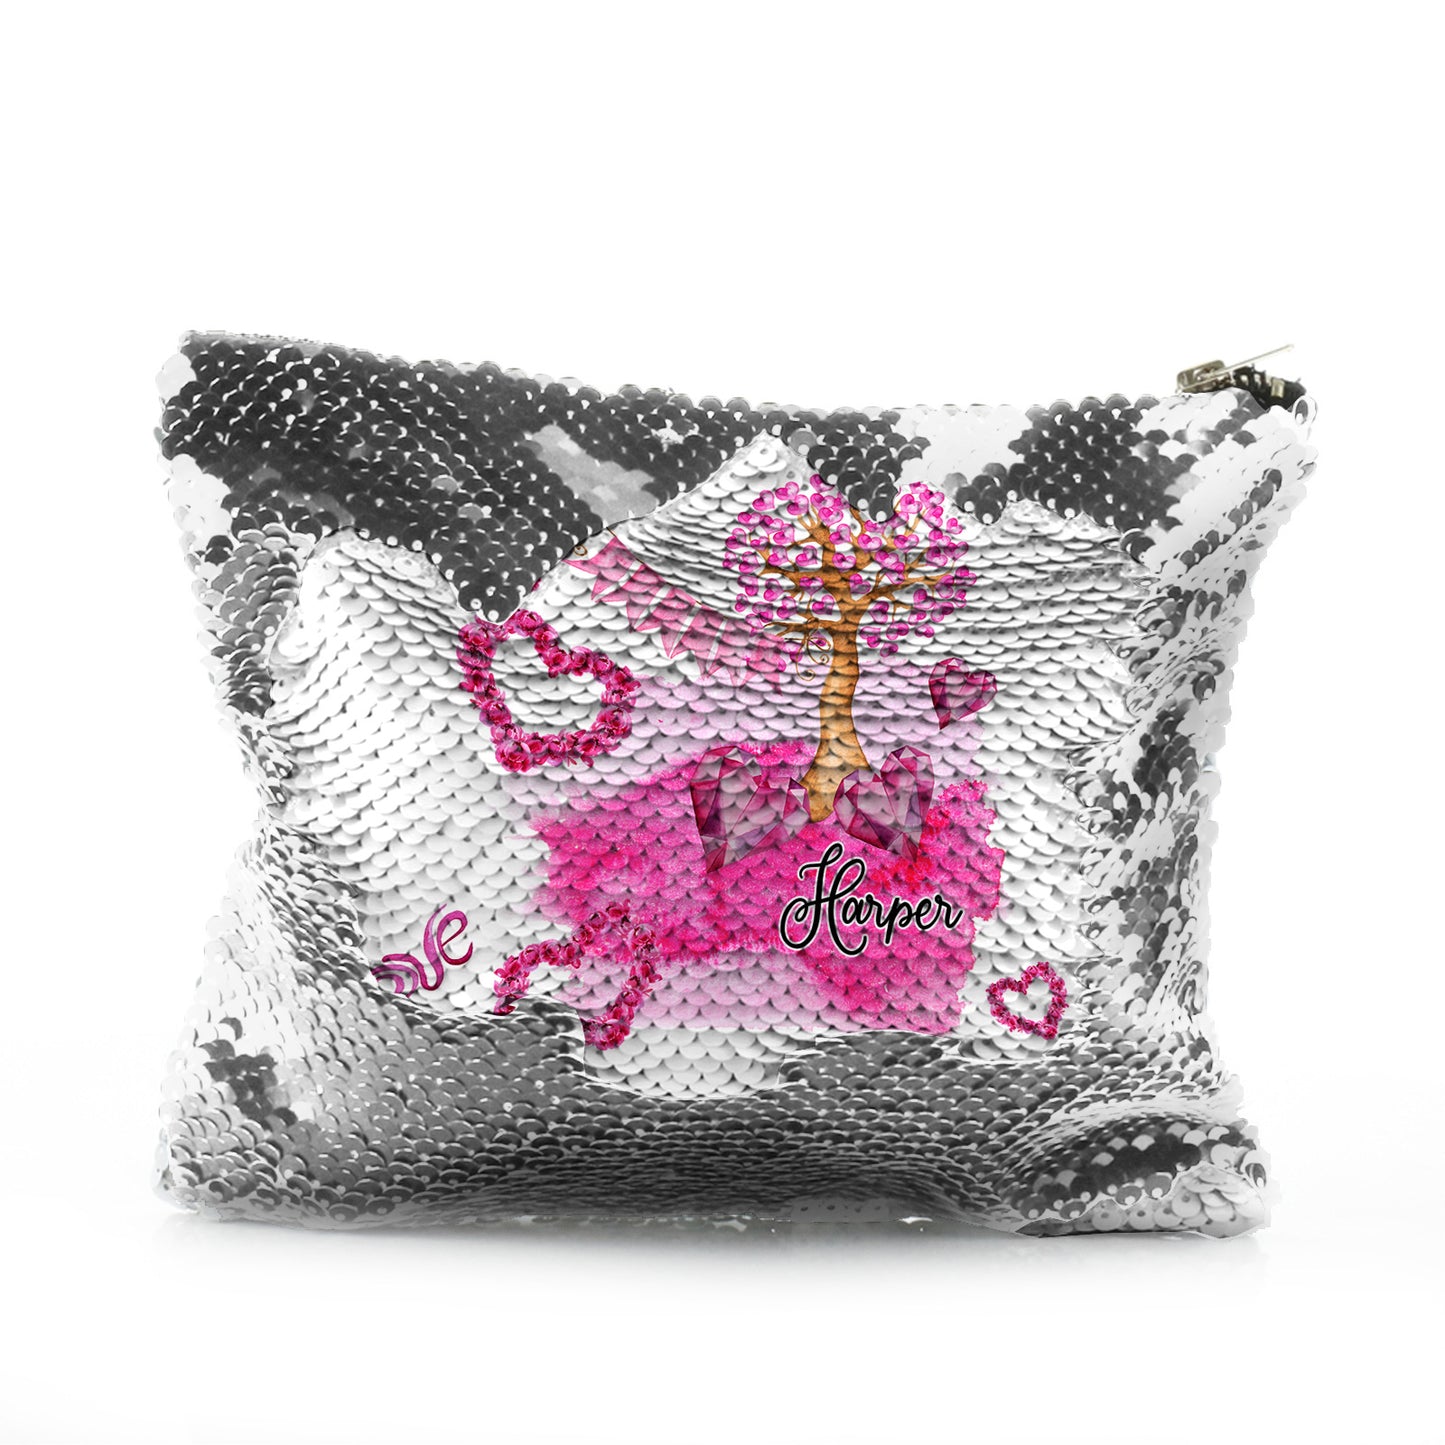 Personalised Sequin Zip Bag with Stylish Text and Pink Love Landscape Print